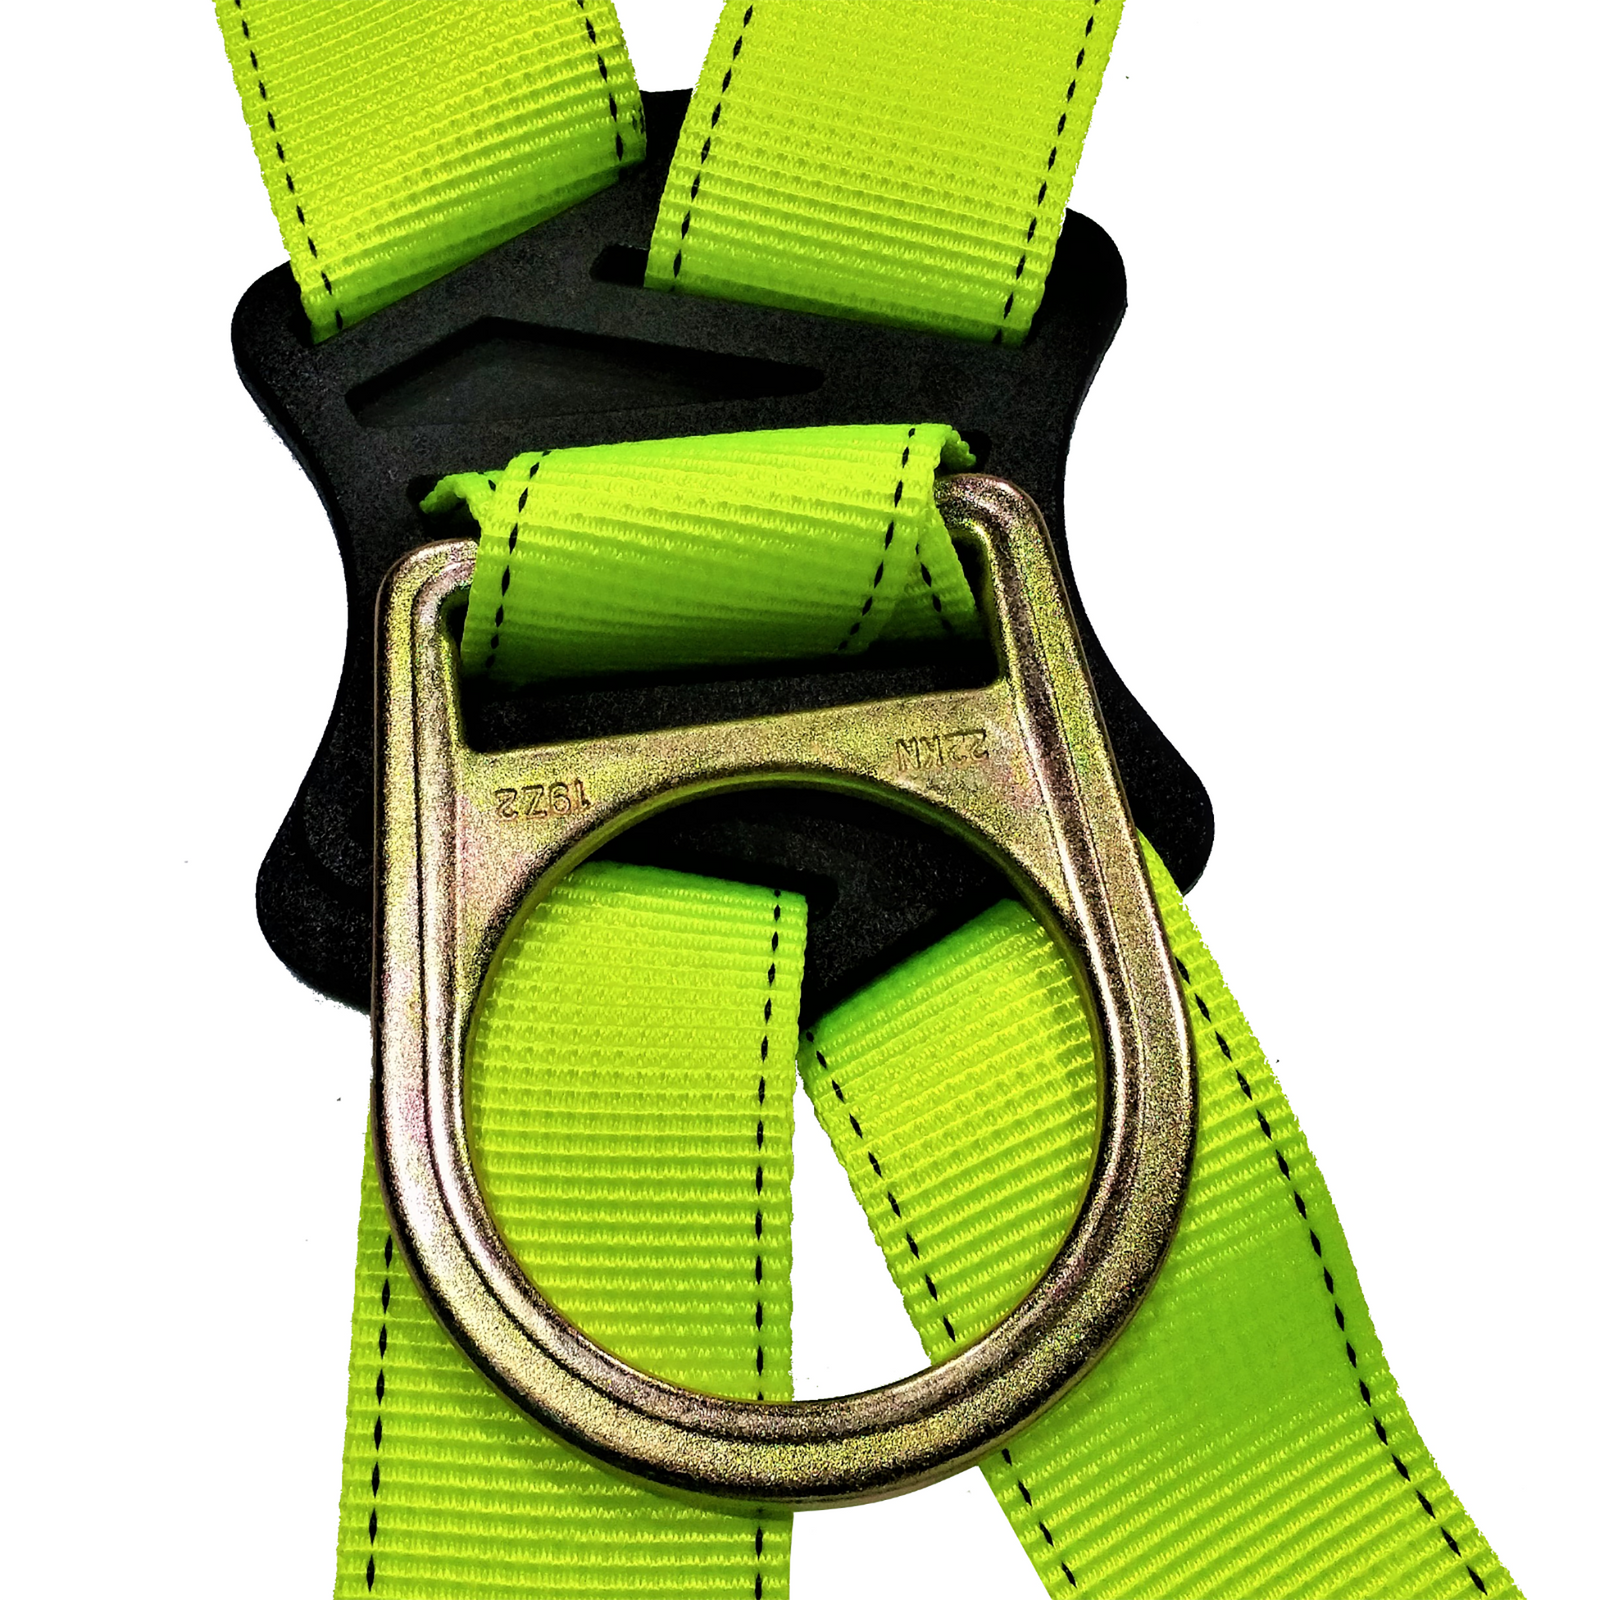 Close up of the hi-vis D ring located in the middle of the persons back when wearing the harness. This metal D ring is fixed into the Hi-vis heavy duty straps of the JORESTECH harness